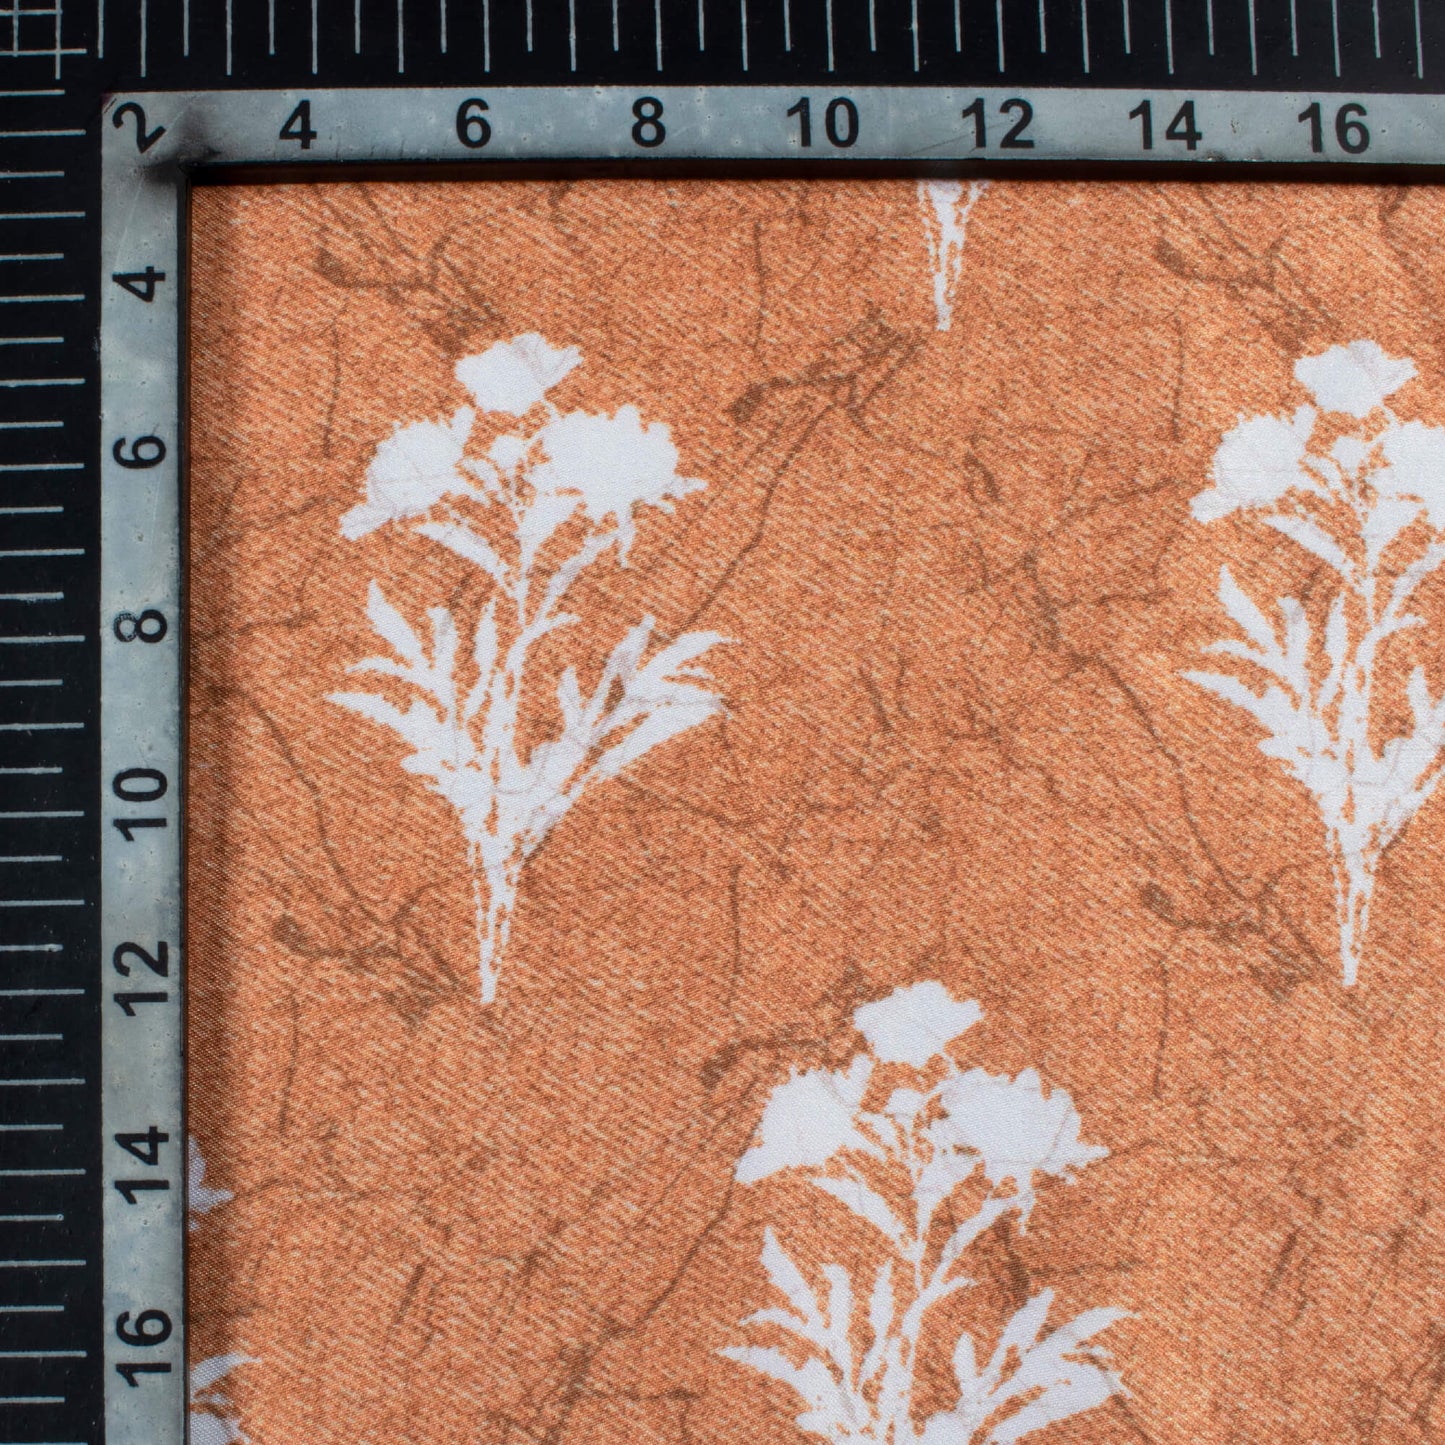 Sable Brown And White Floral Pattern Digital Print Crepe Silk Fabric